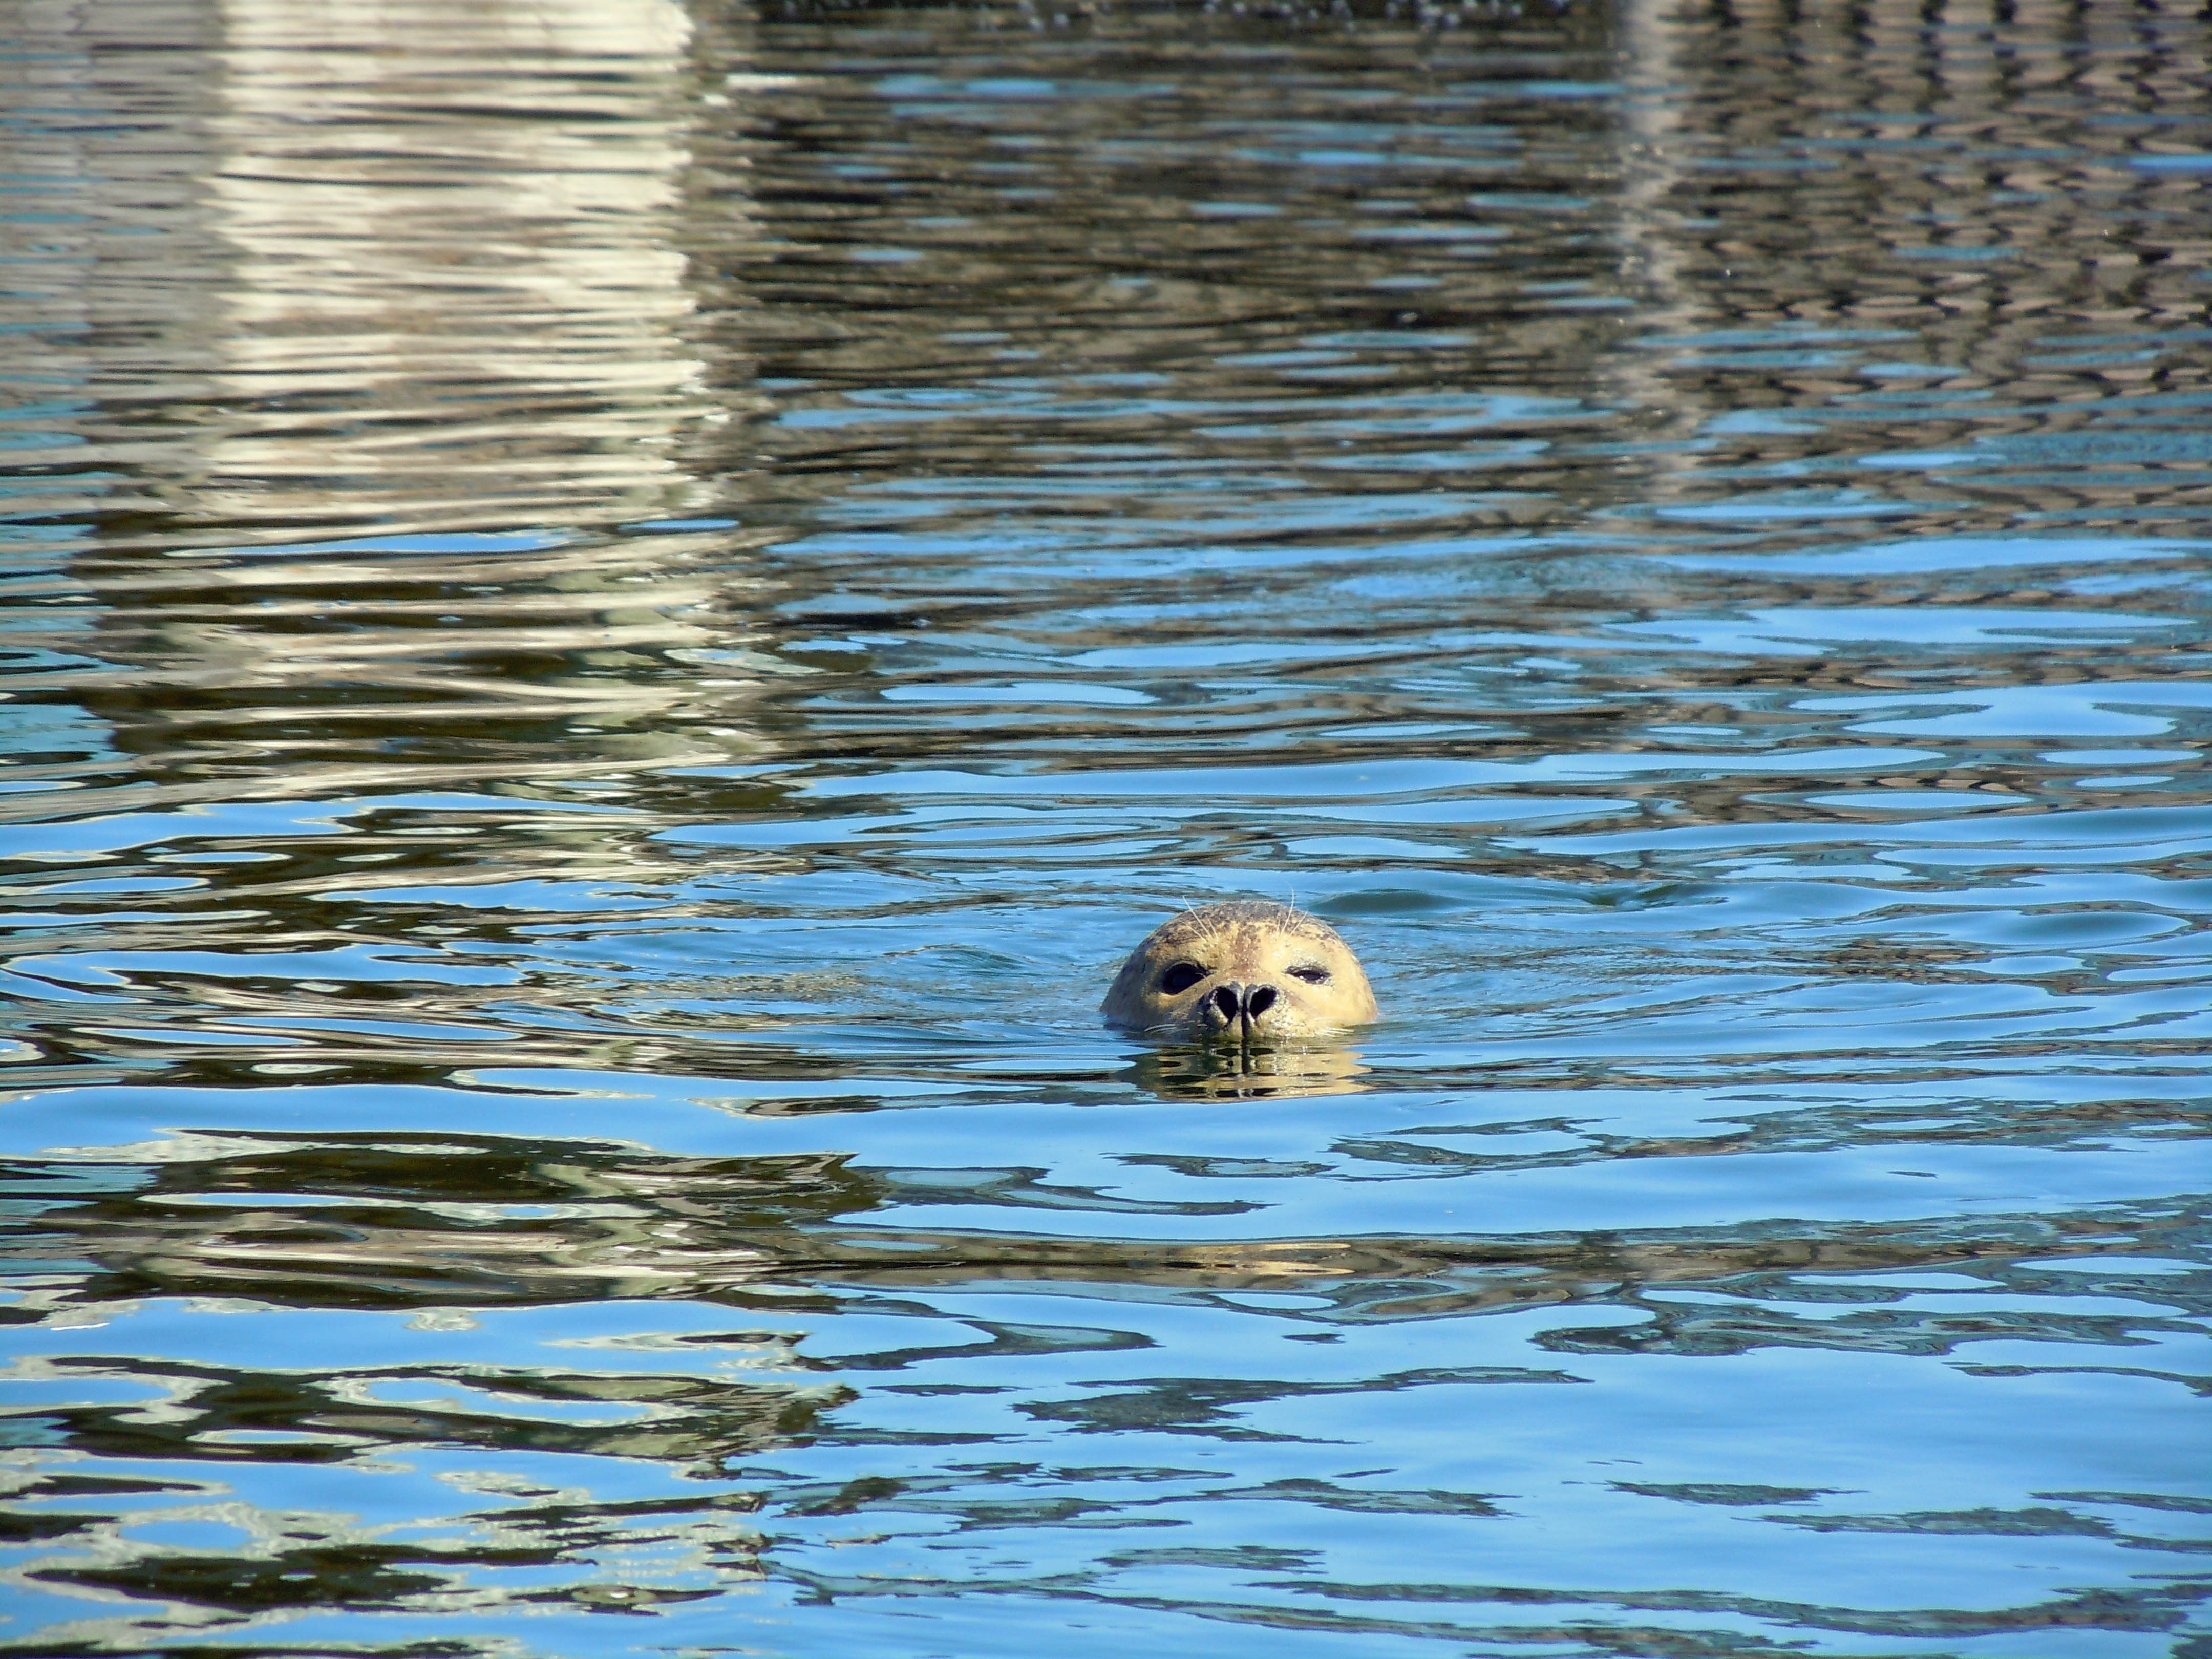 Gold retriever swimming in water during daytime photo